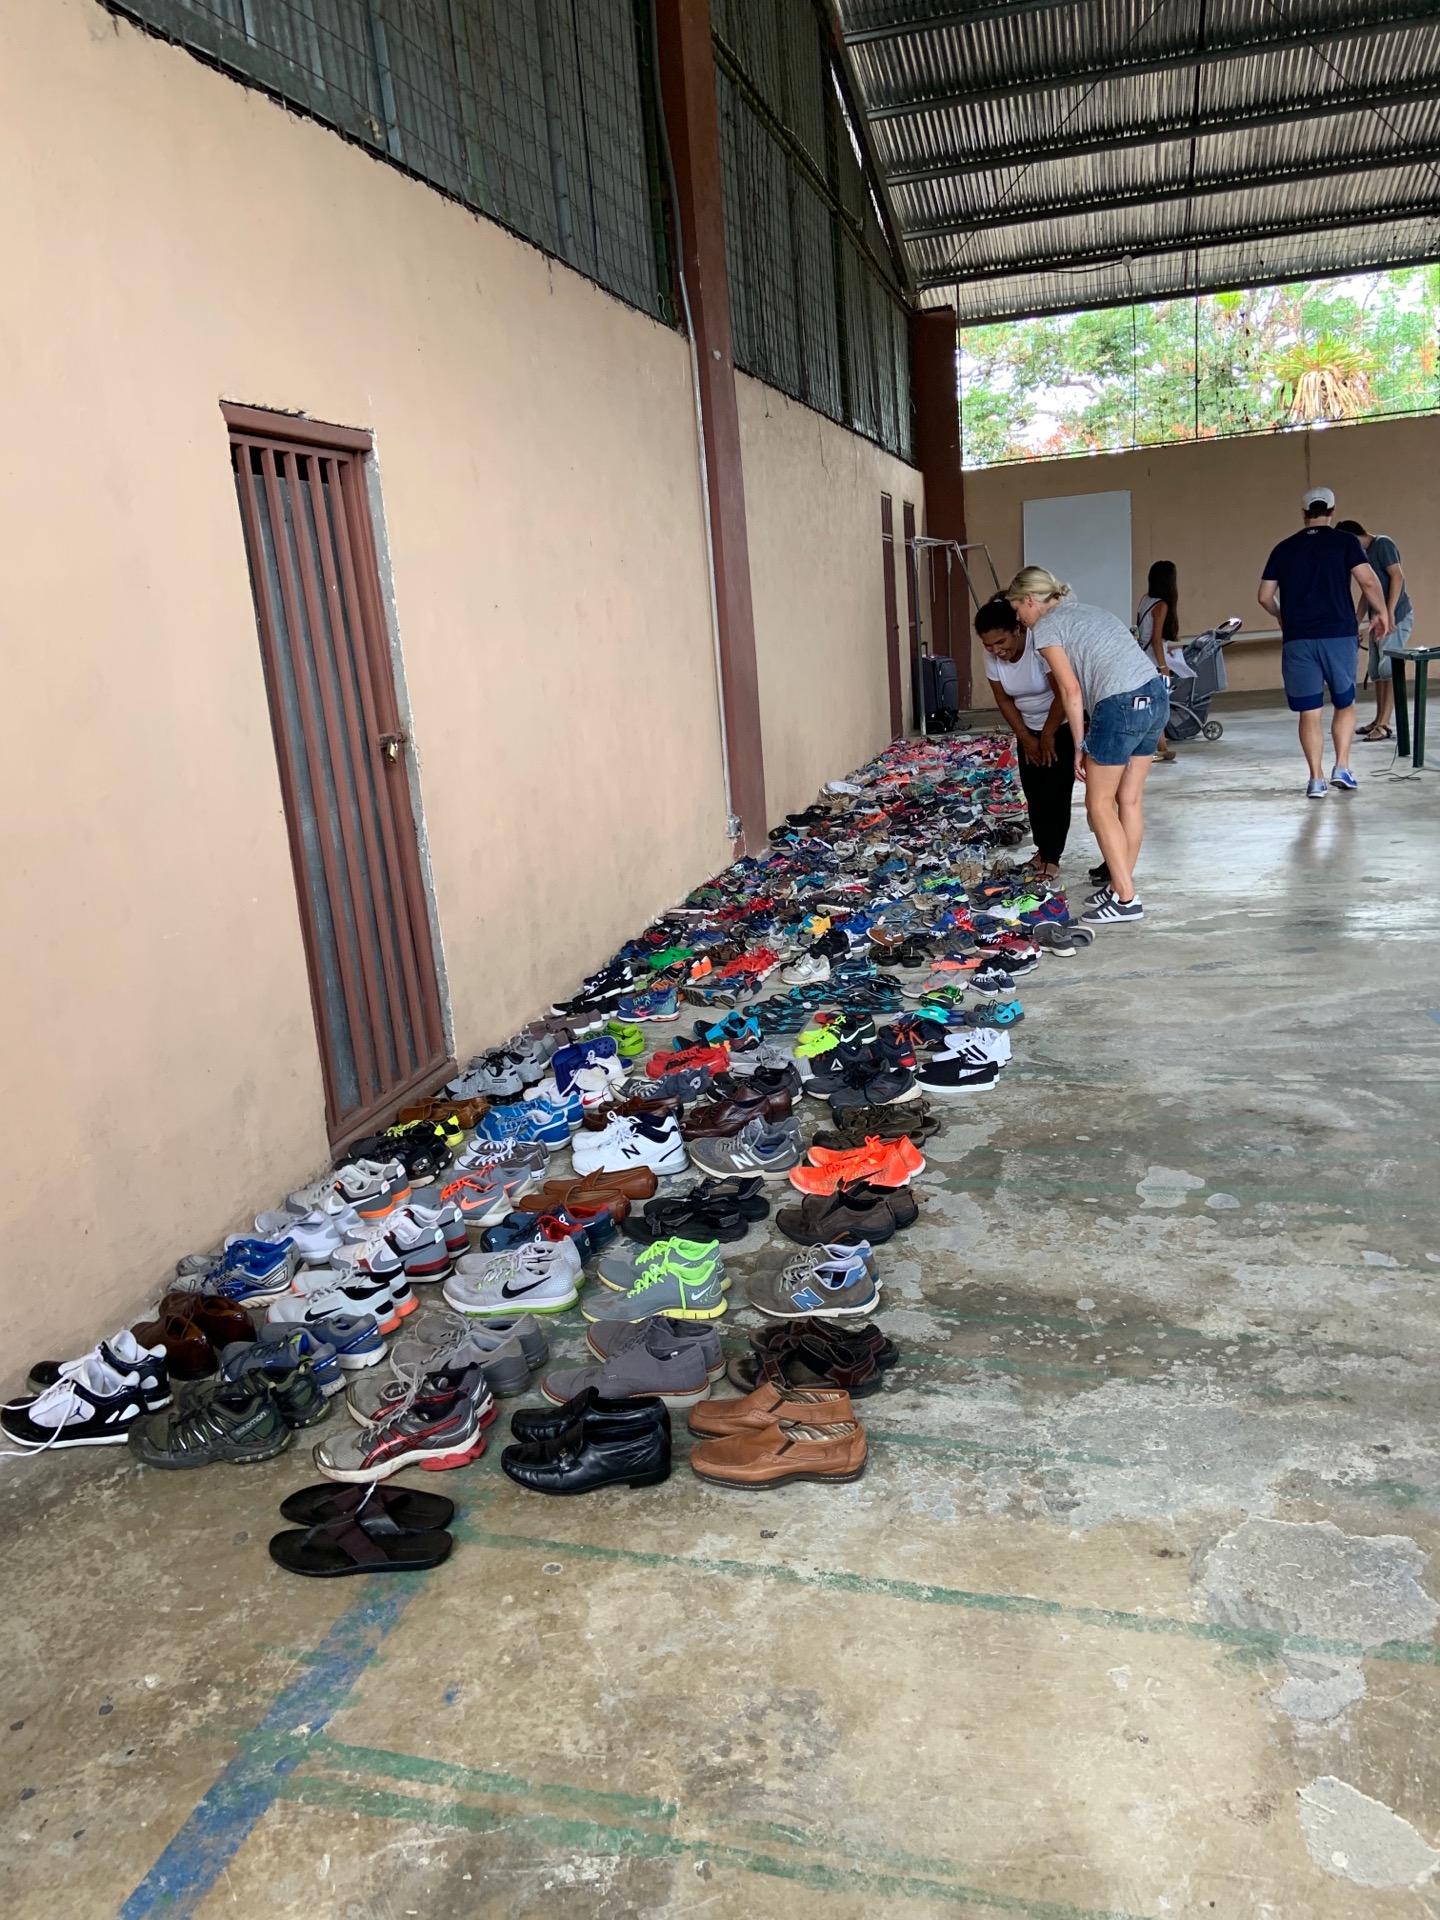 VBS and shoes!